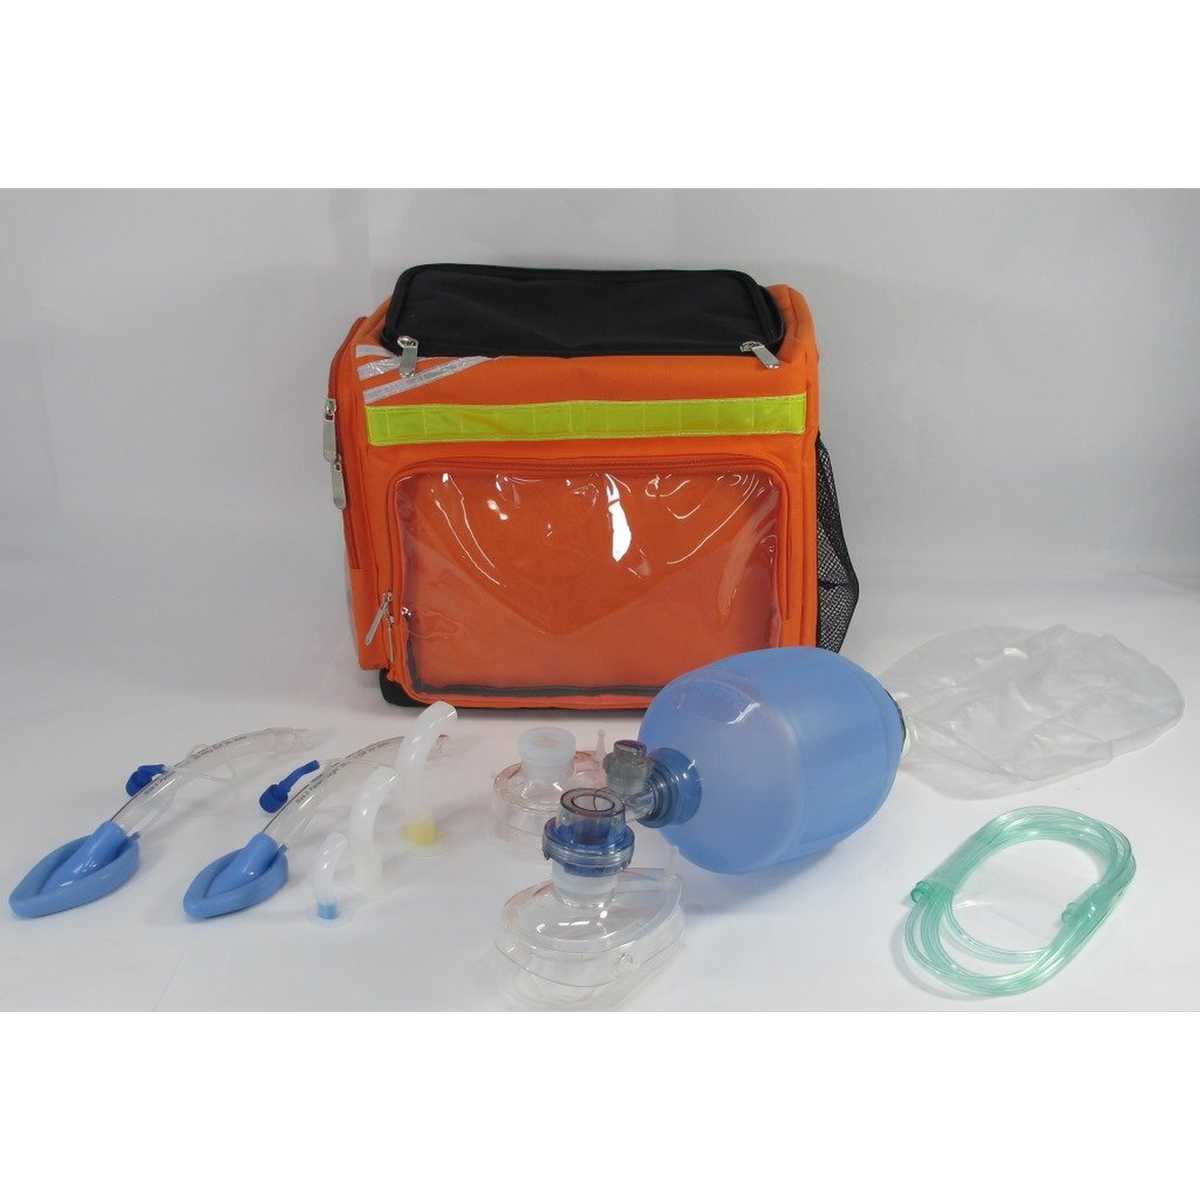 Disposable Adult Resuscitator Set Complete with Emergency Bag